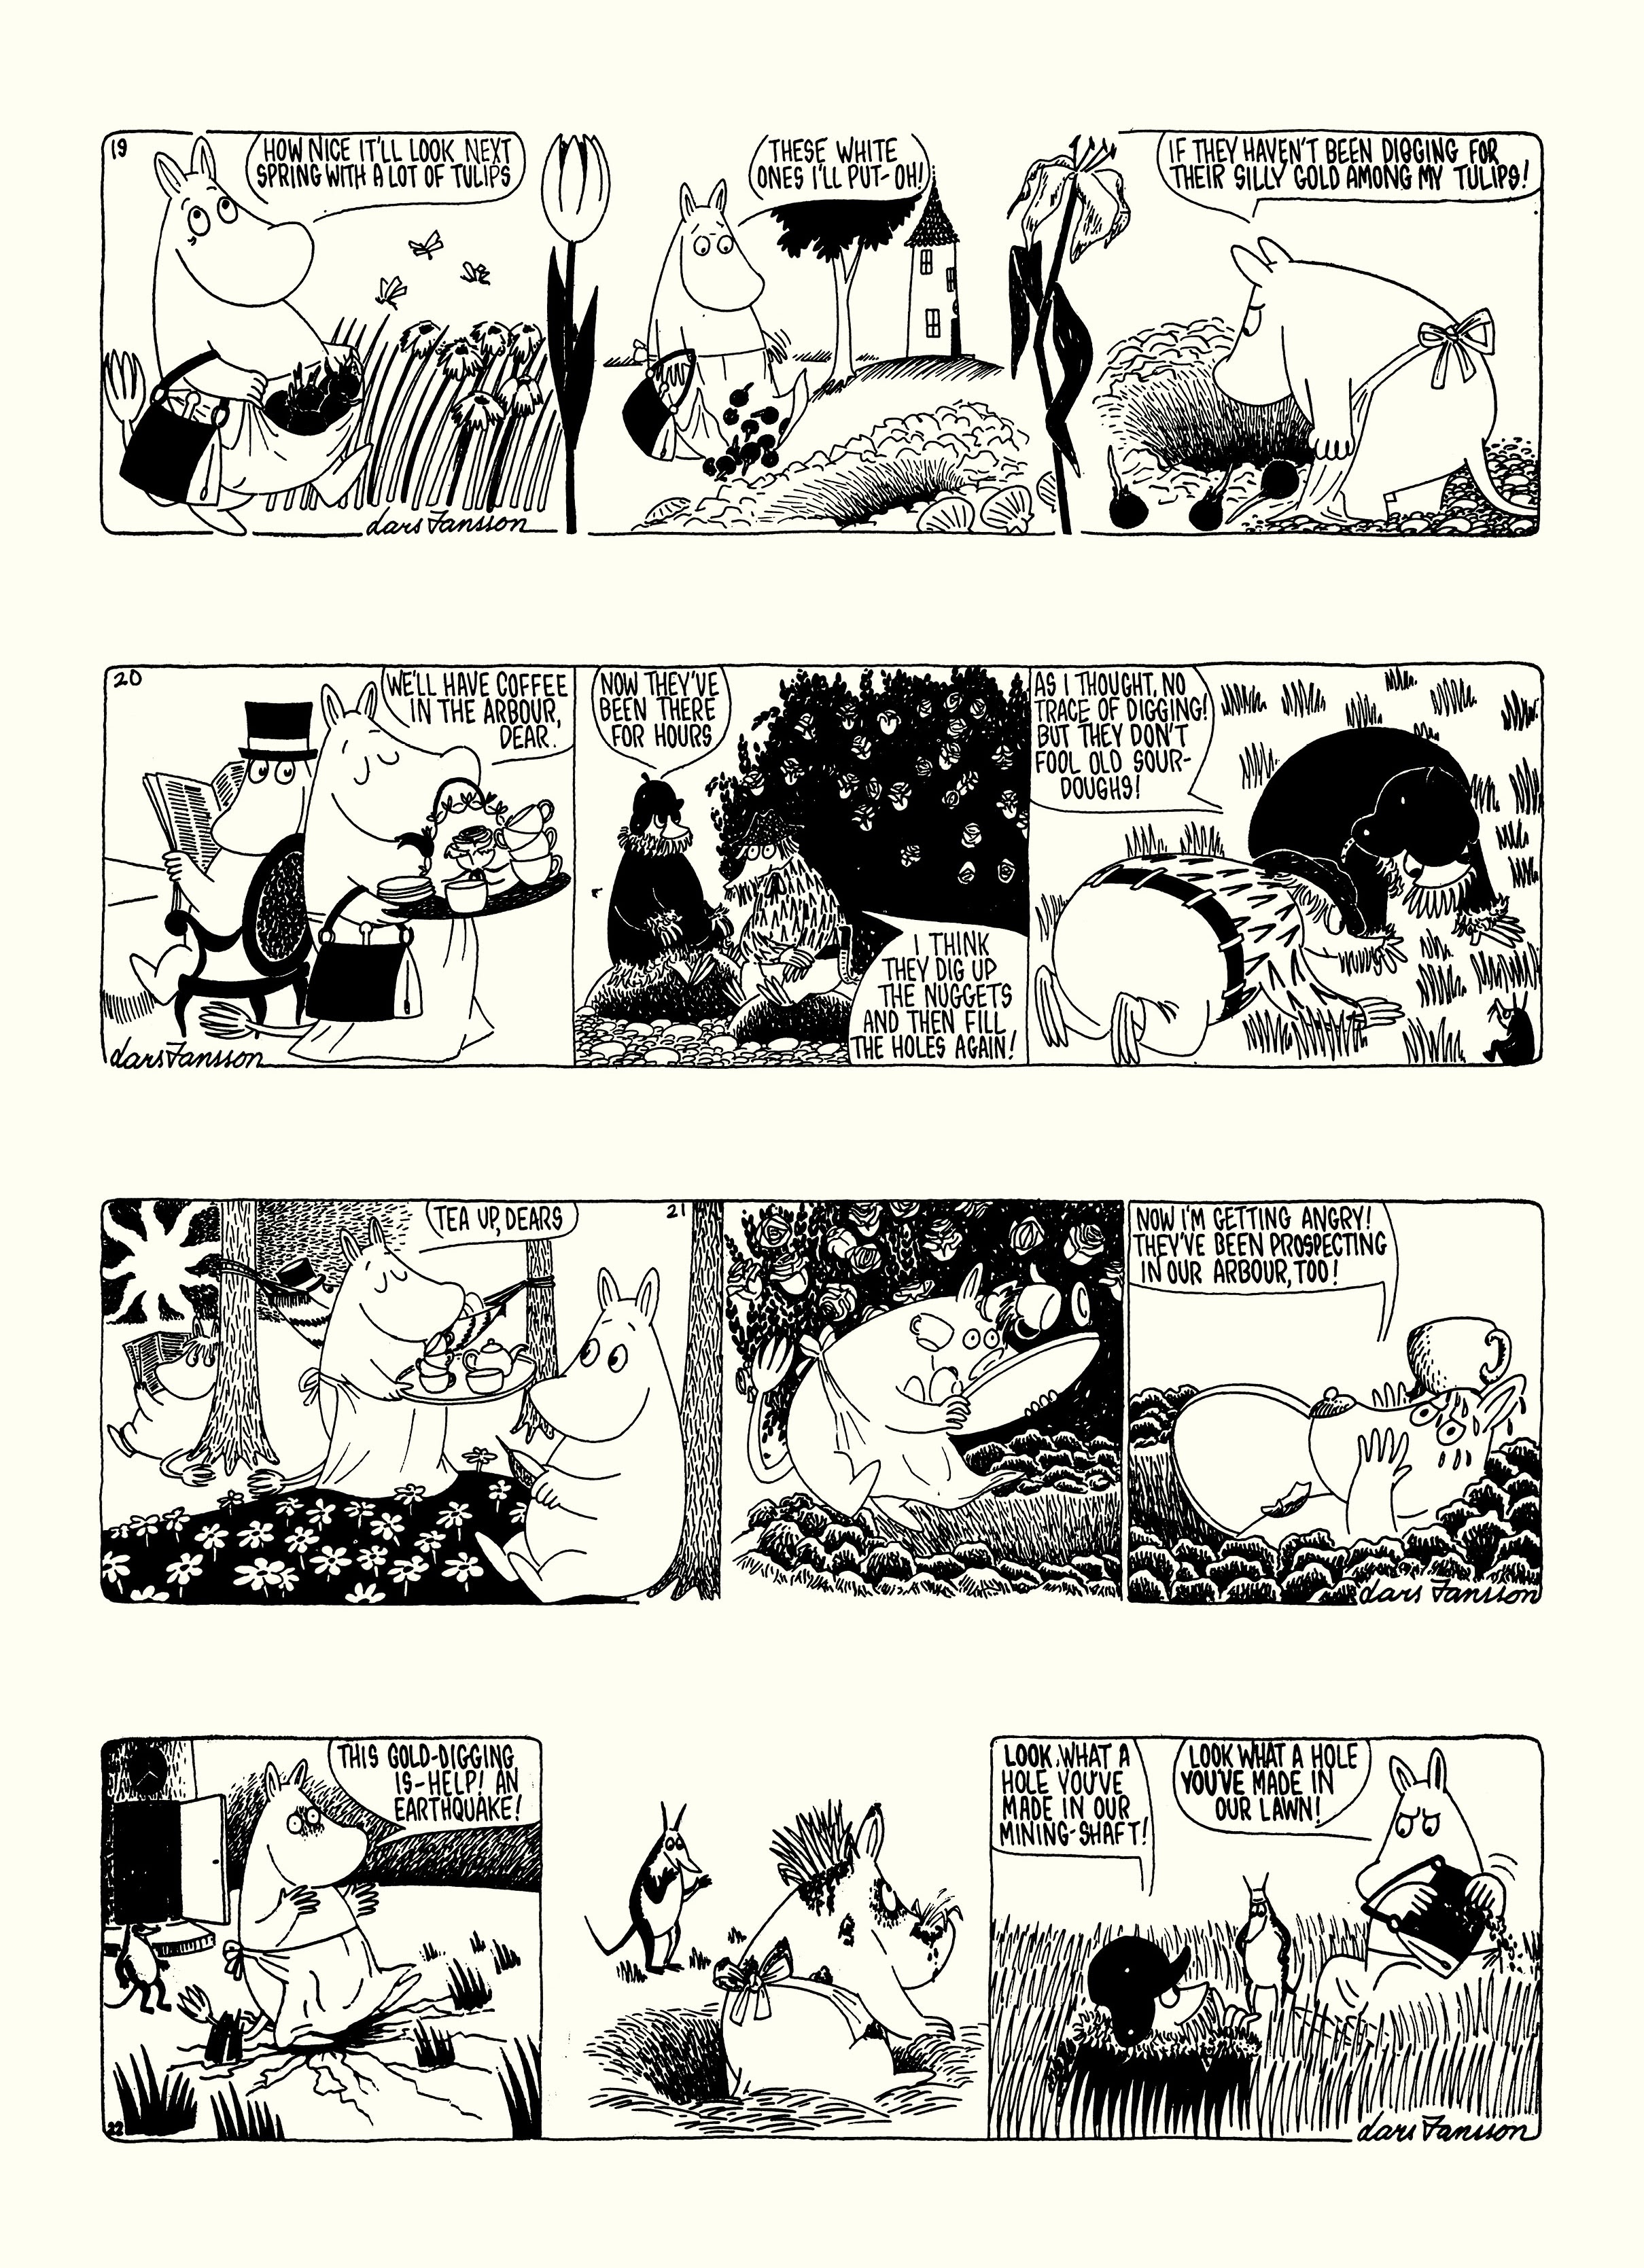 Read online Moomin: The Complete Lars Jansson Comic Strip comic -  Issue # TPB 7 - 74